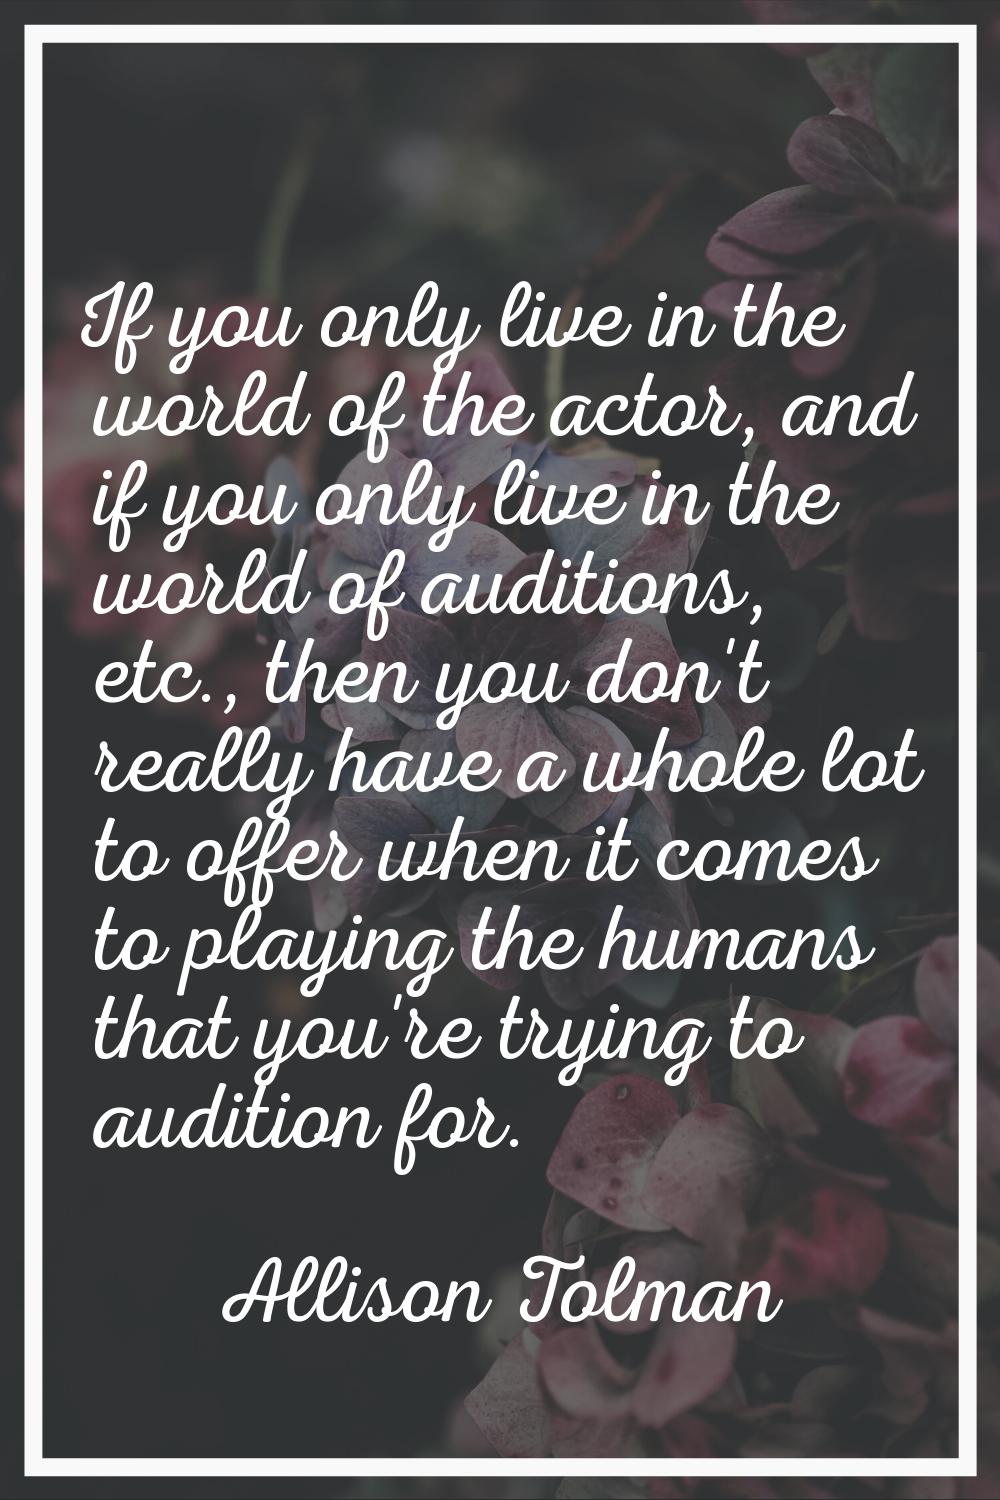 If you only live in the world of the actor, and if you only live in the world of auditions, etc., t